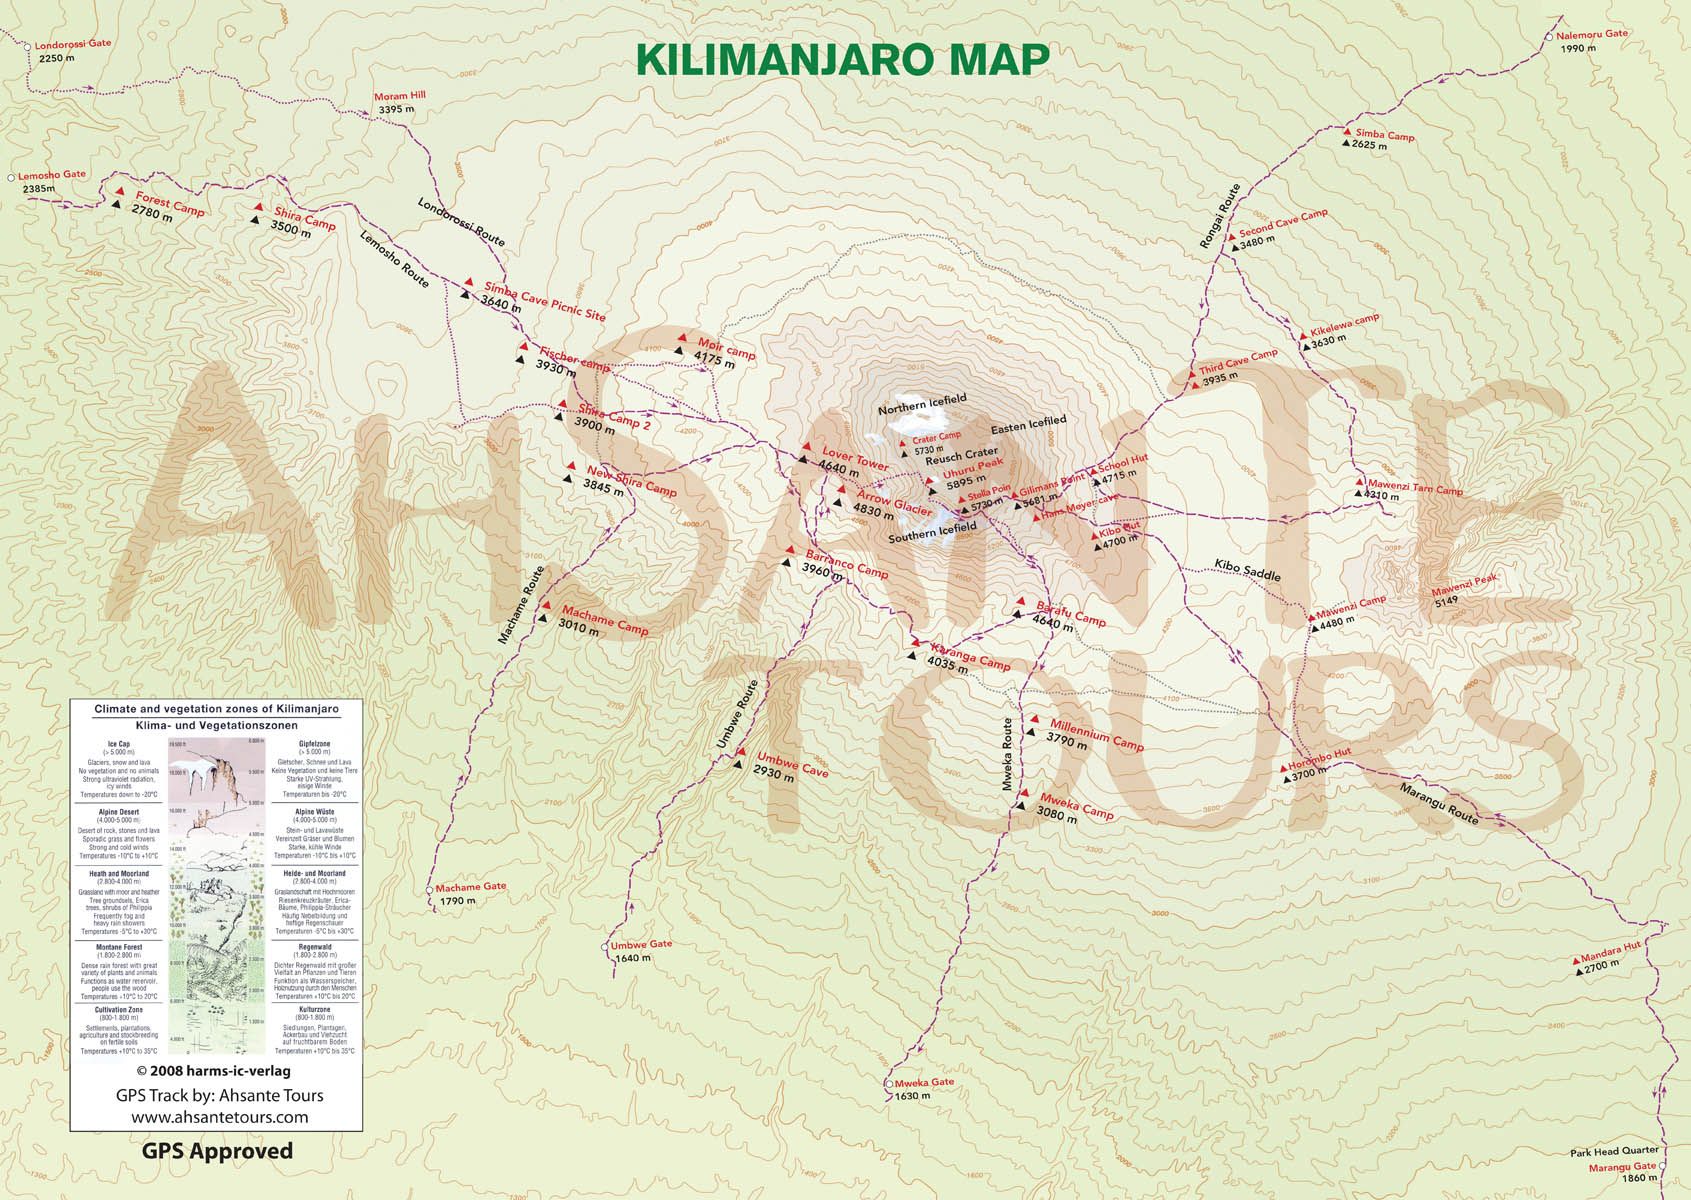 The Kilimanjaro routes, mapped. Map: Ahsante Tours